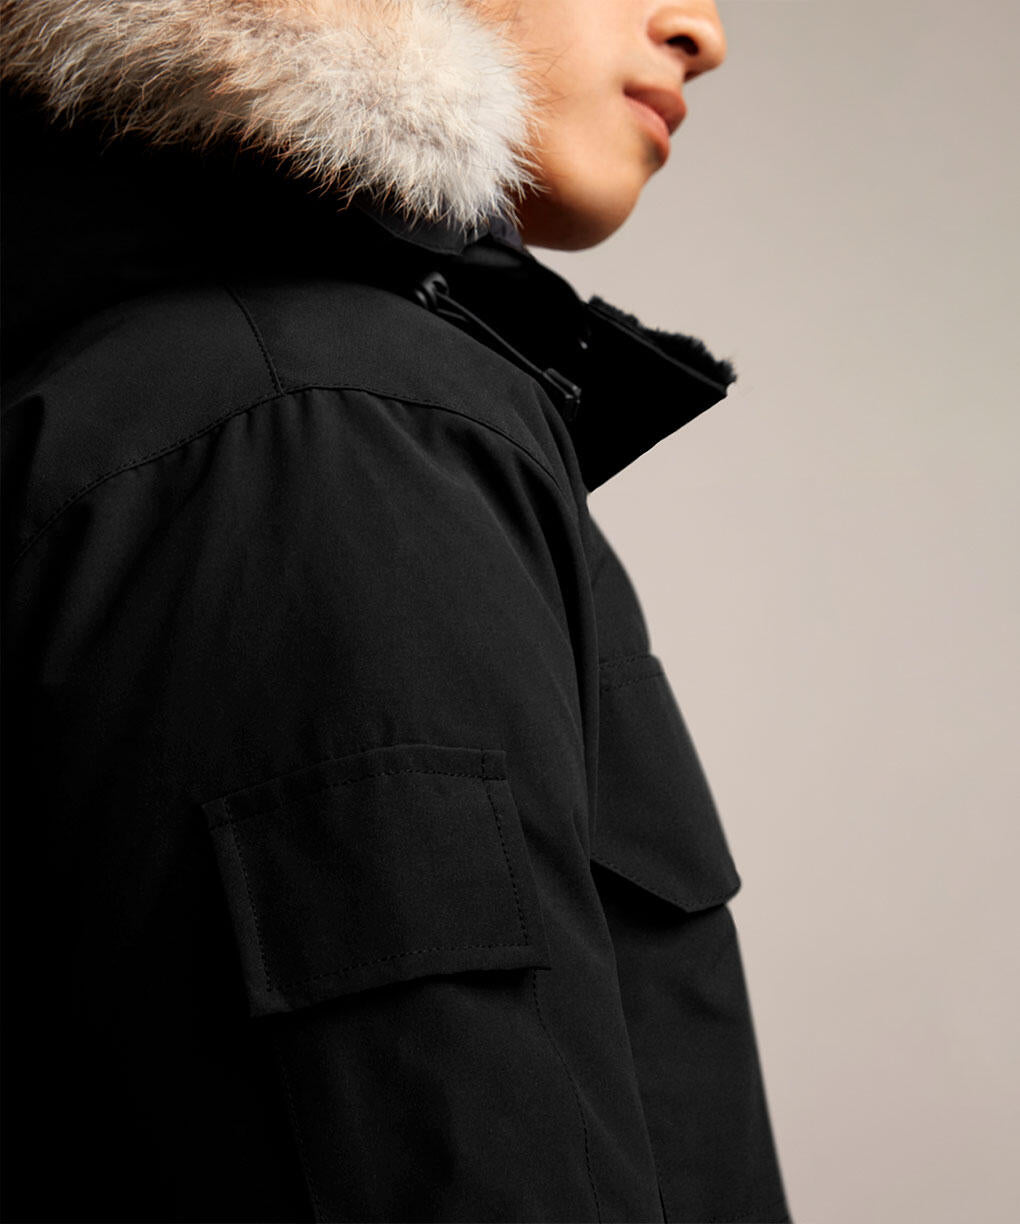 CANADA GOOSE "EXPEDITION PARKA FUSION FIT" (BLACK)